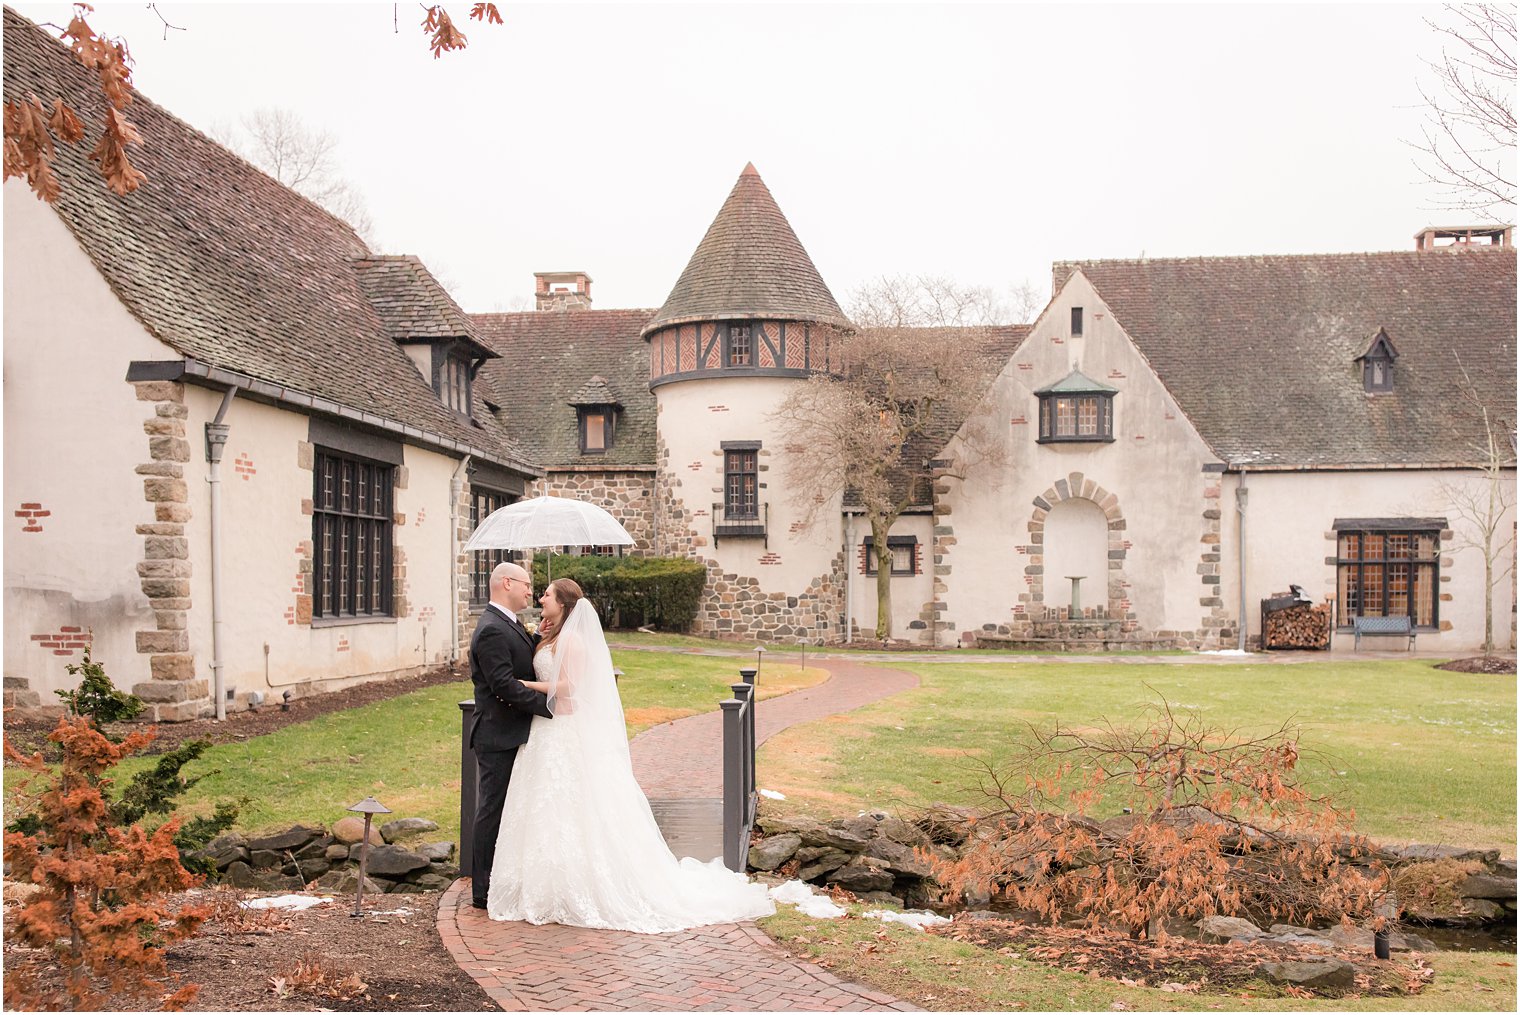 rainy wedding at Pleasantdale Chateau | photos of bride and groom with umbrella